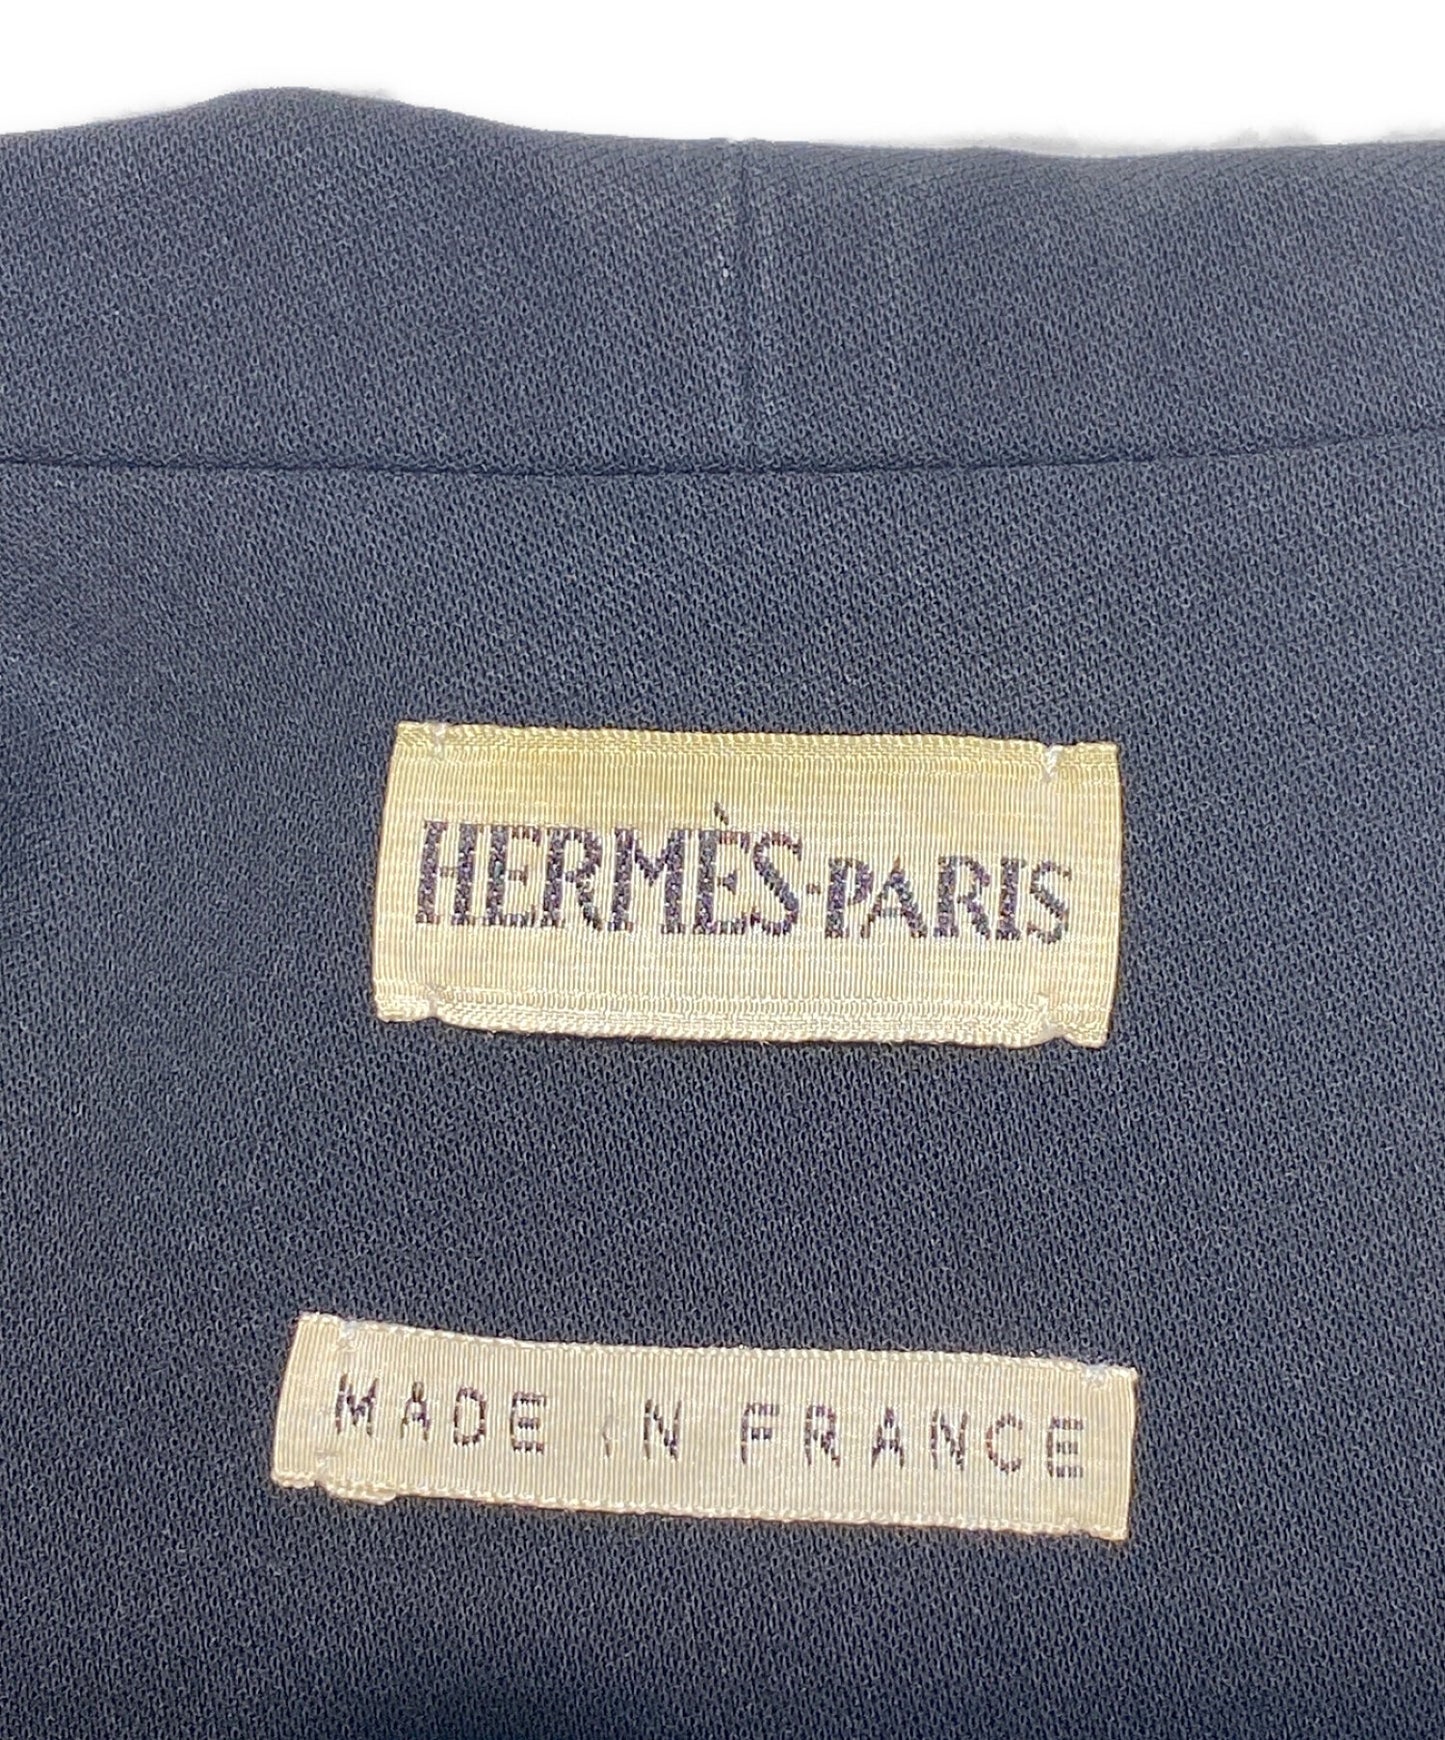 [Pre-owned] HERMES Layered Buttonless Jacket / Margiela Period / Archive